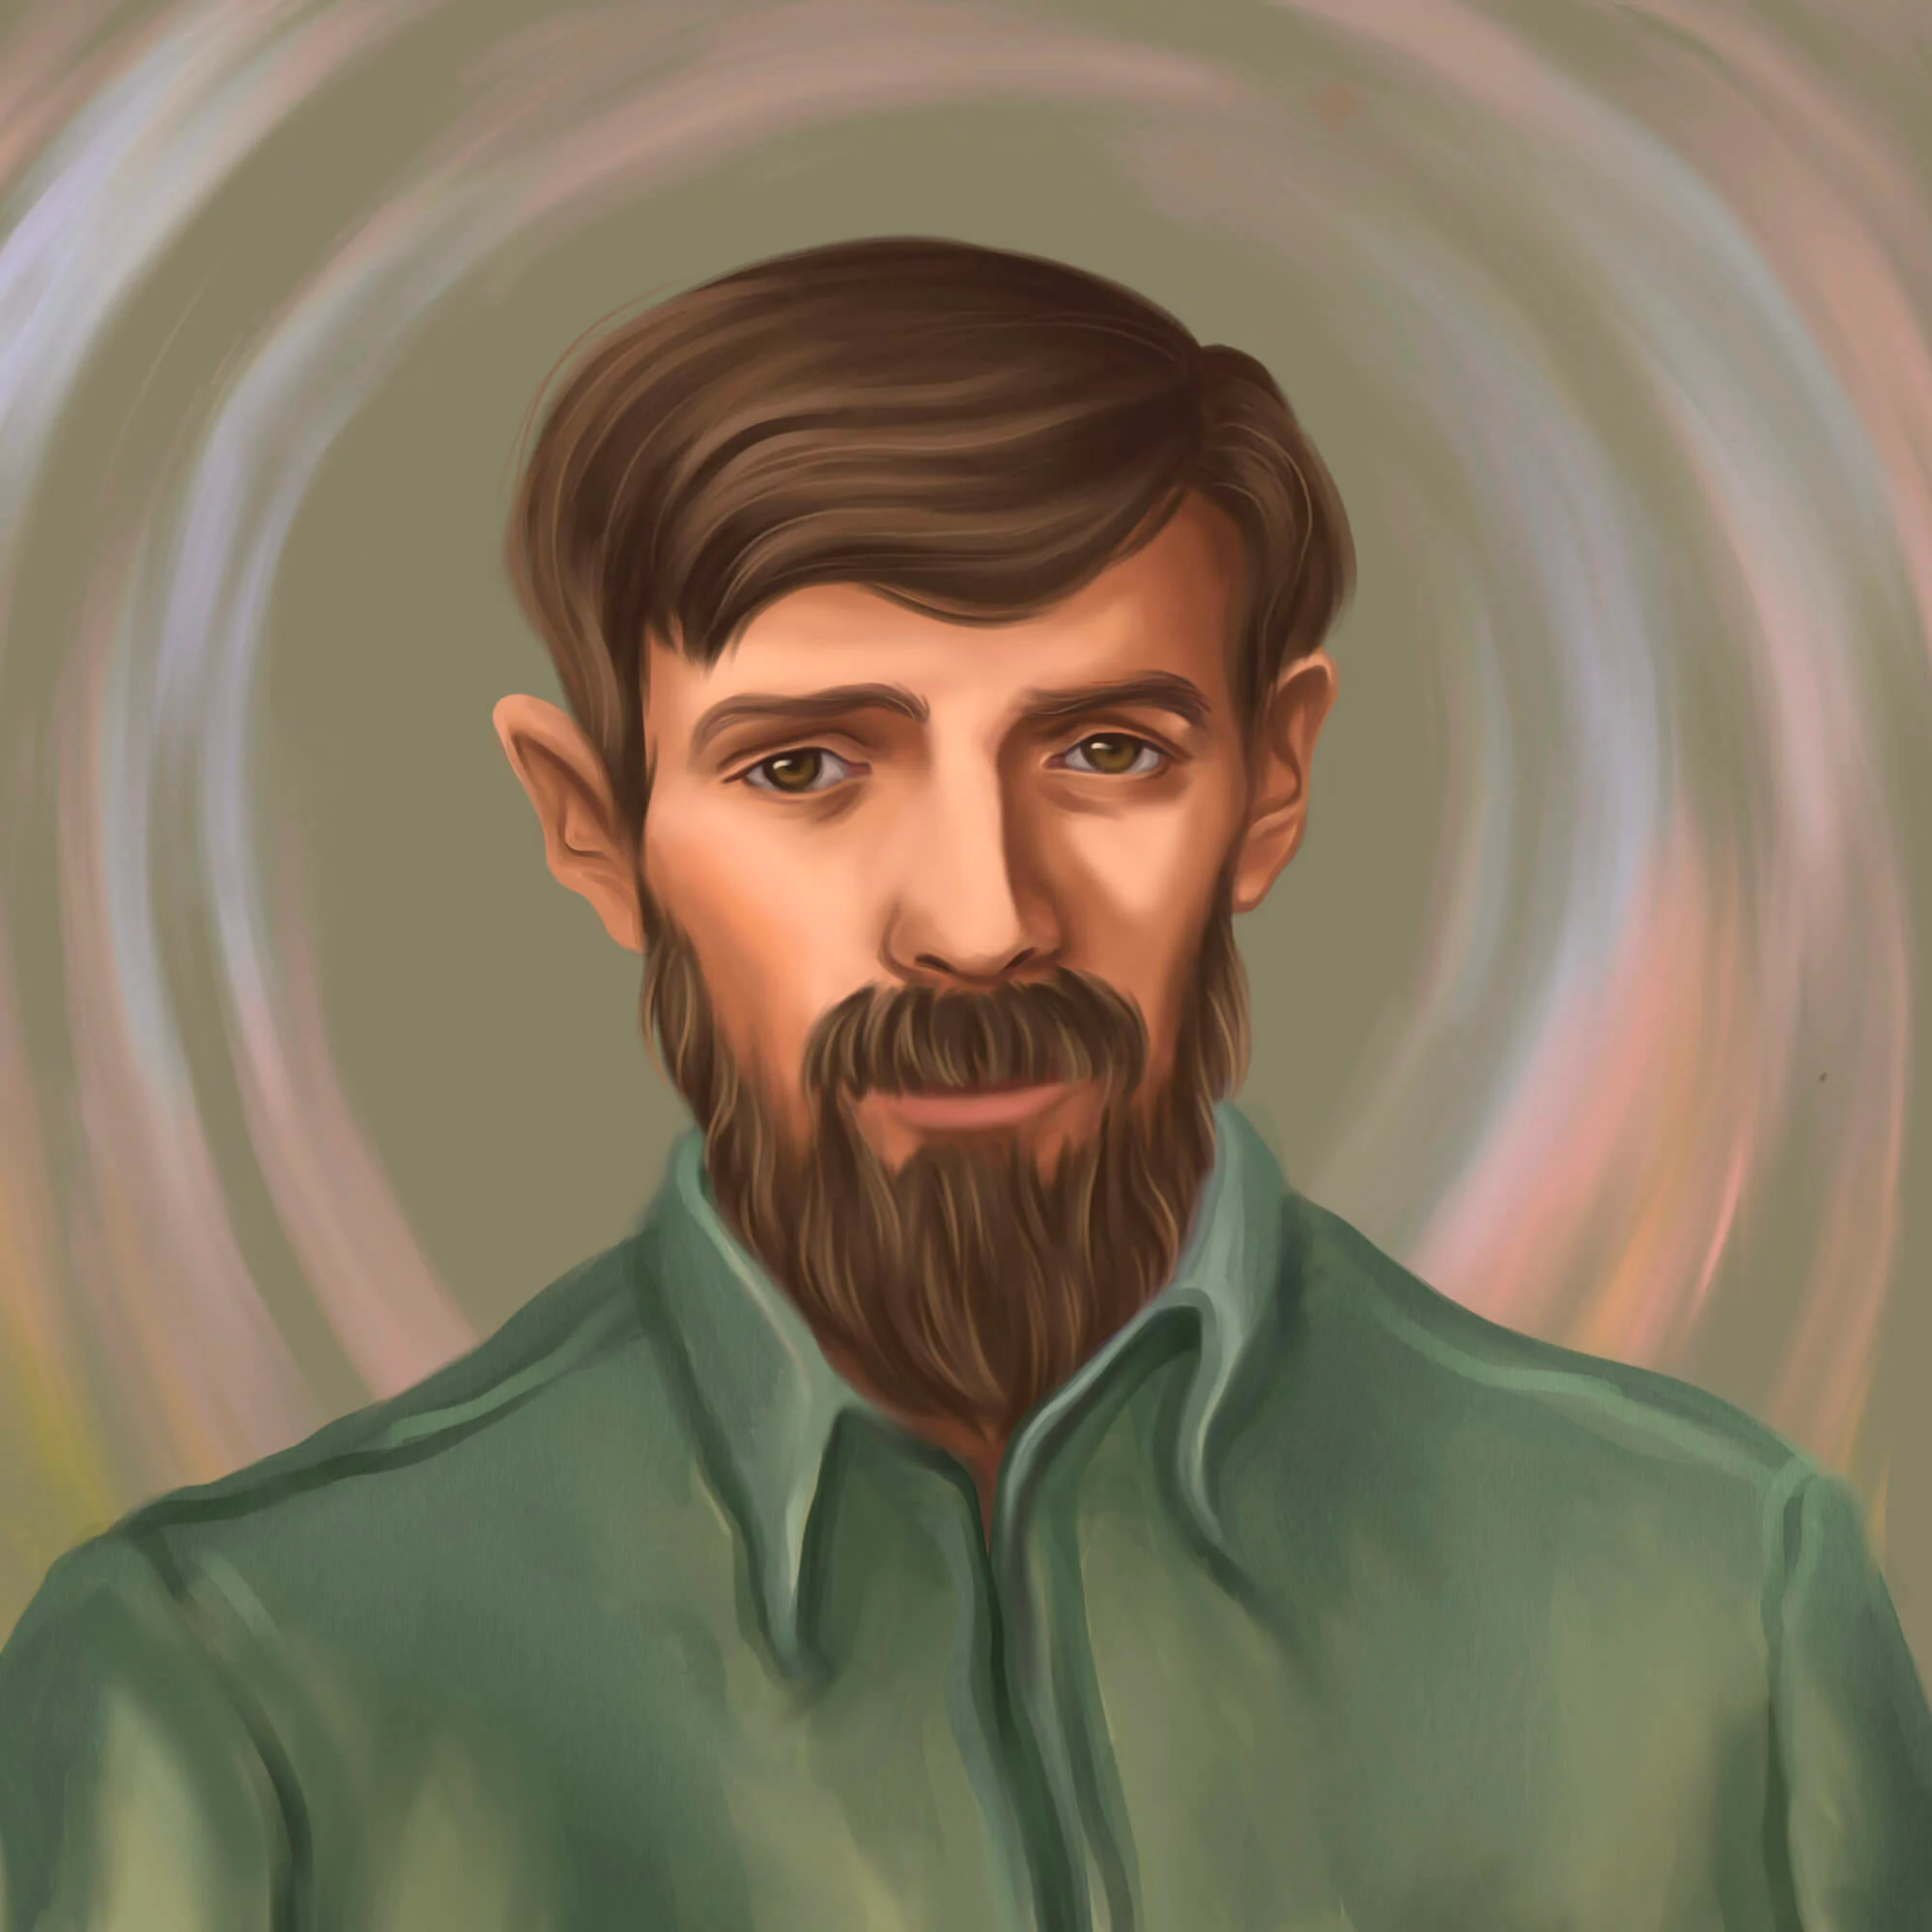 Discovering Nottingham’s Iconic Artist: A Journey Through the Life and Works of D.H. Lawrence